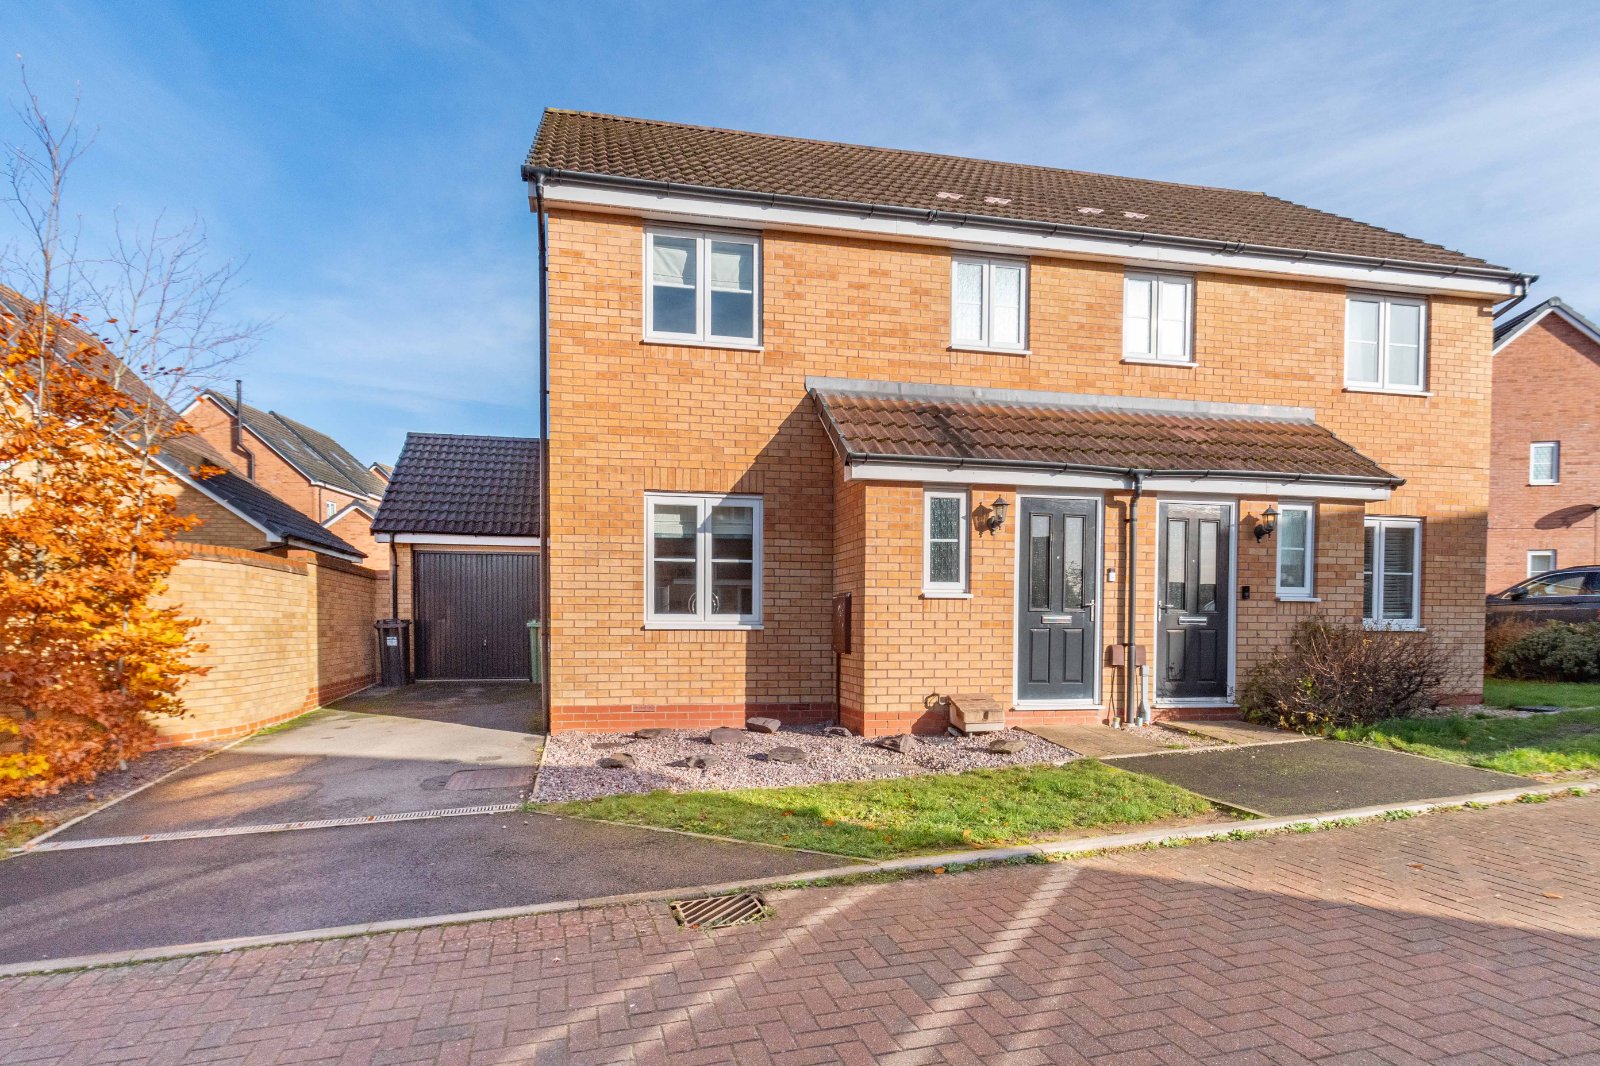 3 bed house for sale in Gretton Close, Brockhill - Property Image 1